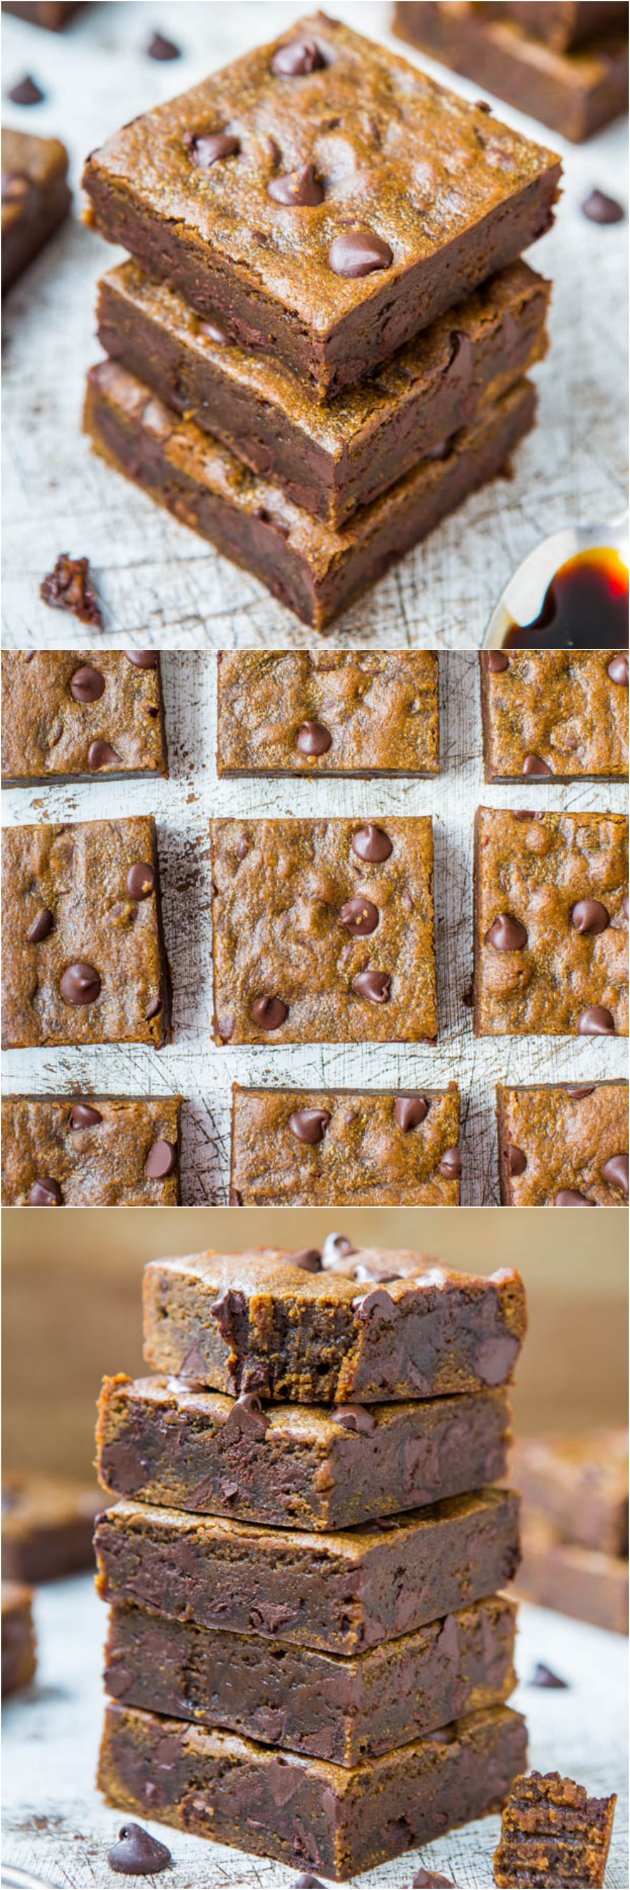 Soft and Chewy Gingerbread Molasses Chocolate Chip Bars - Rich, chocolaty & like eating a piece of molasses fudge!